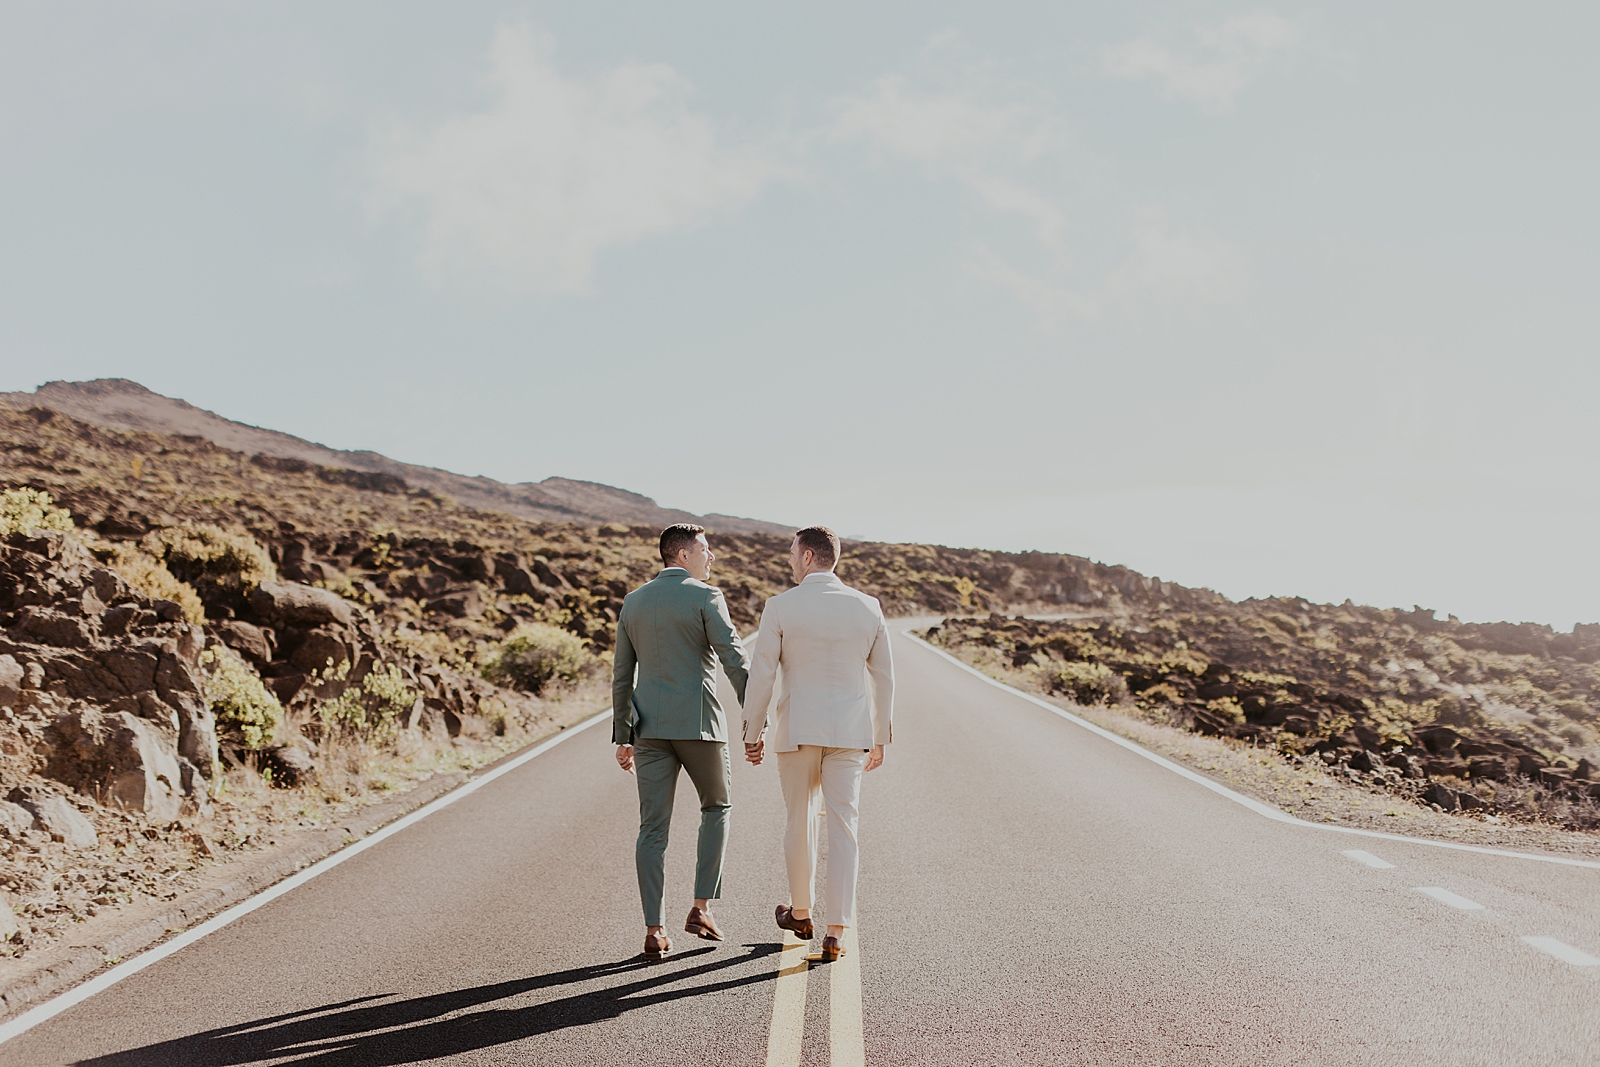 Grooms holding hands and walking on open one way road